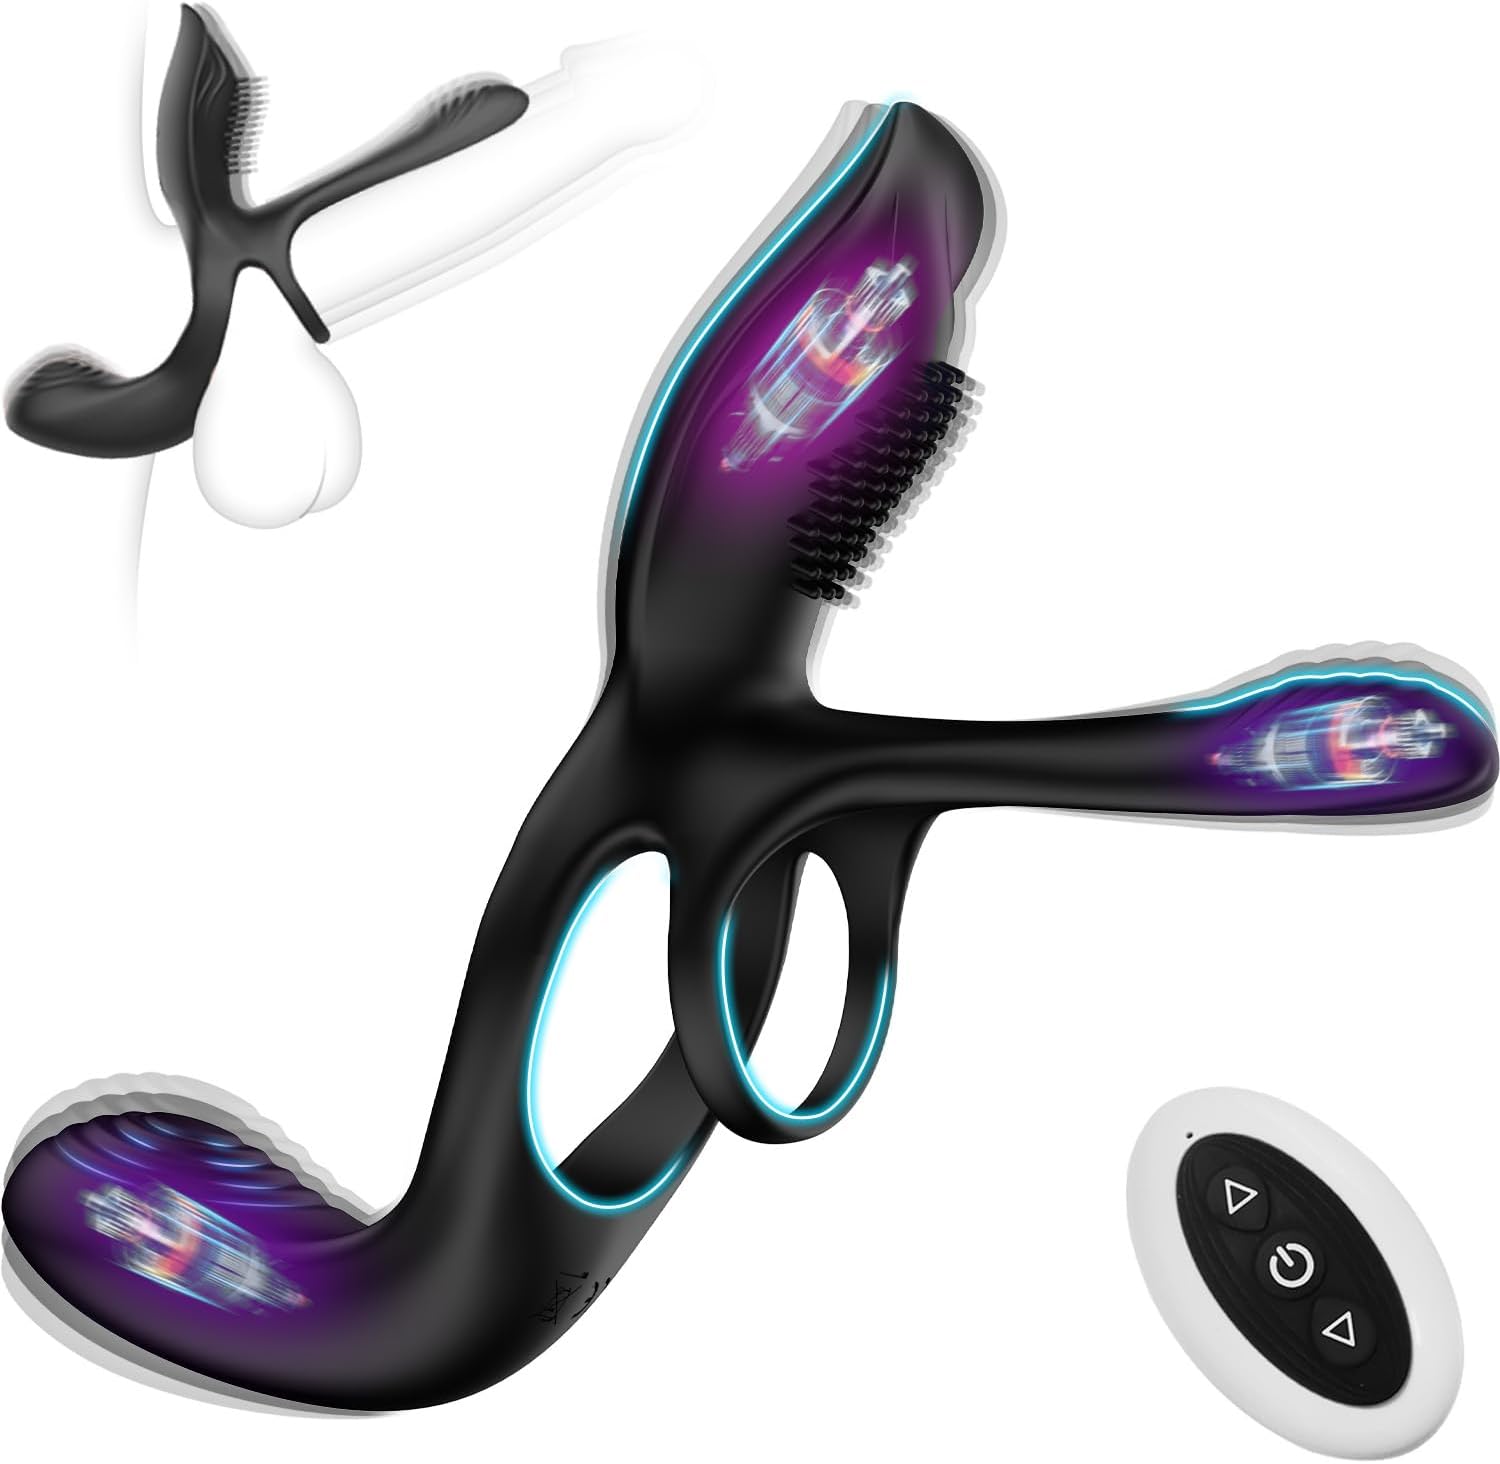 Vibrator for Couple, 3 in 1 Vibrating Cock Ring with 10 Modes, Men's Penis Vibrators, Perineum , G spot, Clitorals Stimulator for Women, Sex Novelties, Adult Sex Toys & Games Black